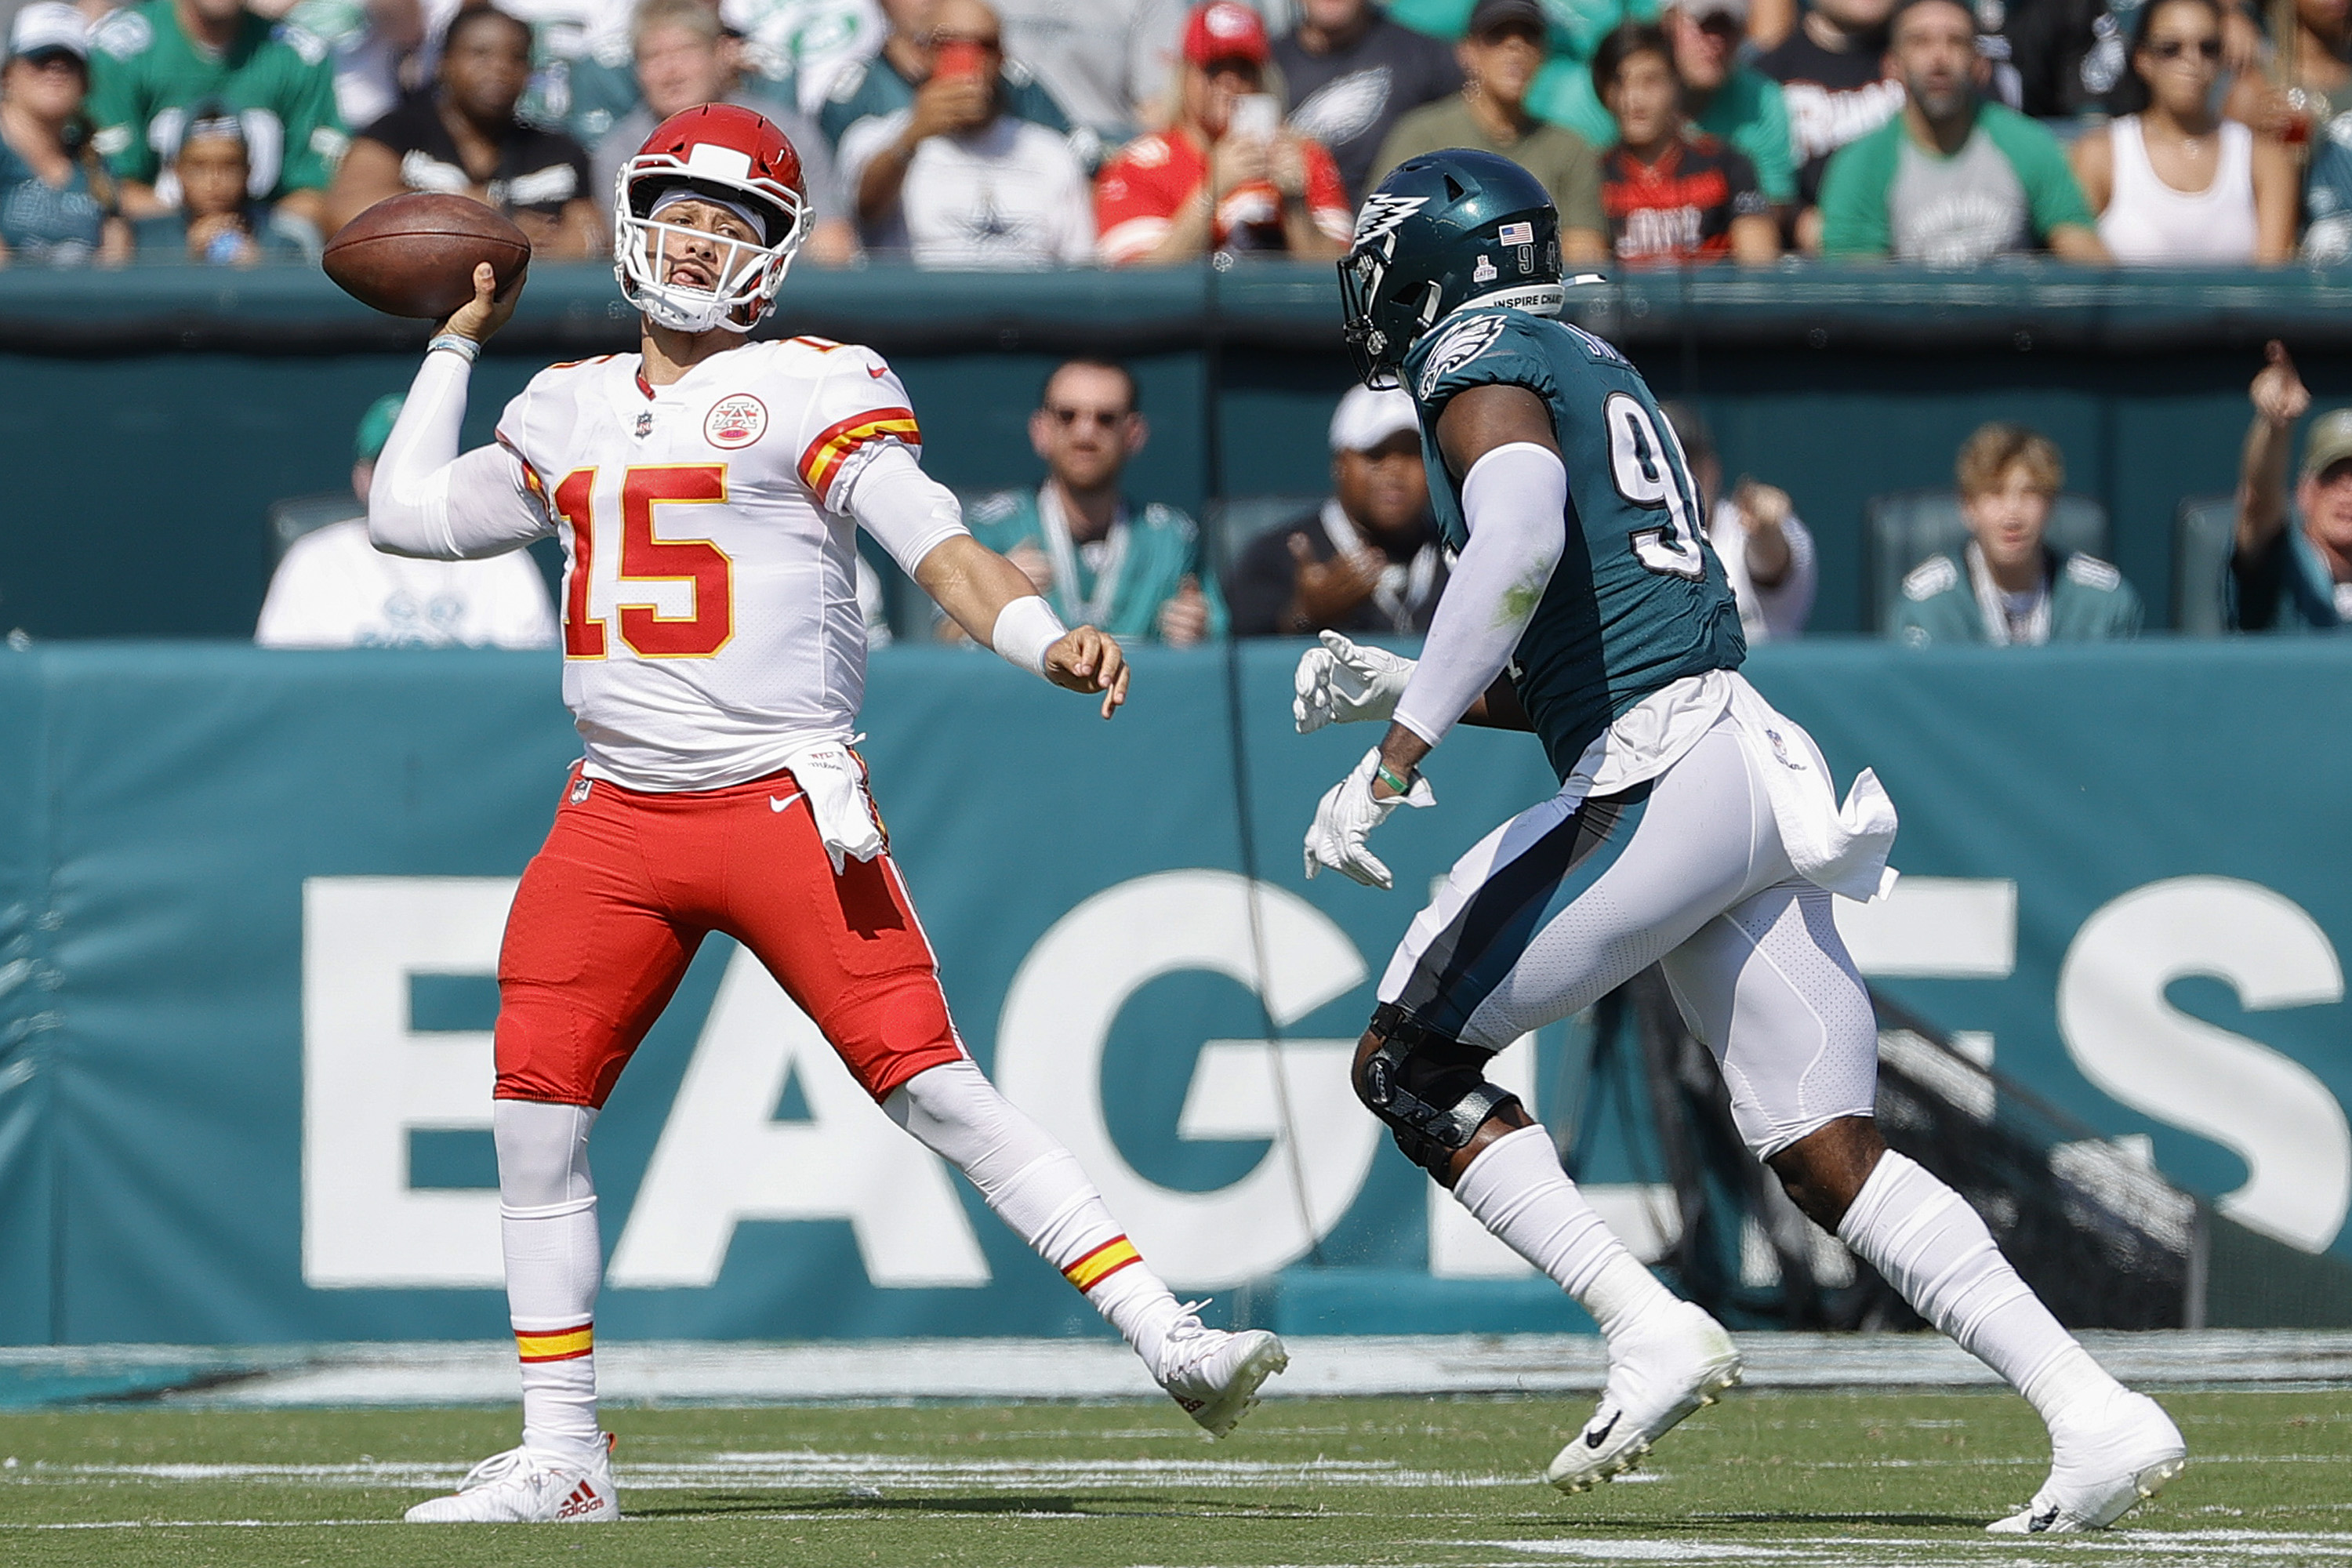 Super Bowl 2023: Chiefs vs. Eagles breakdown by position. Which